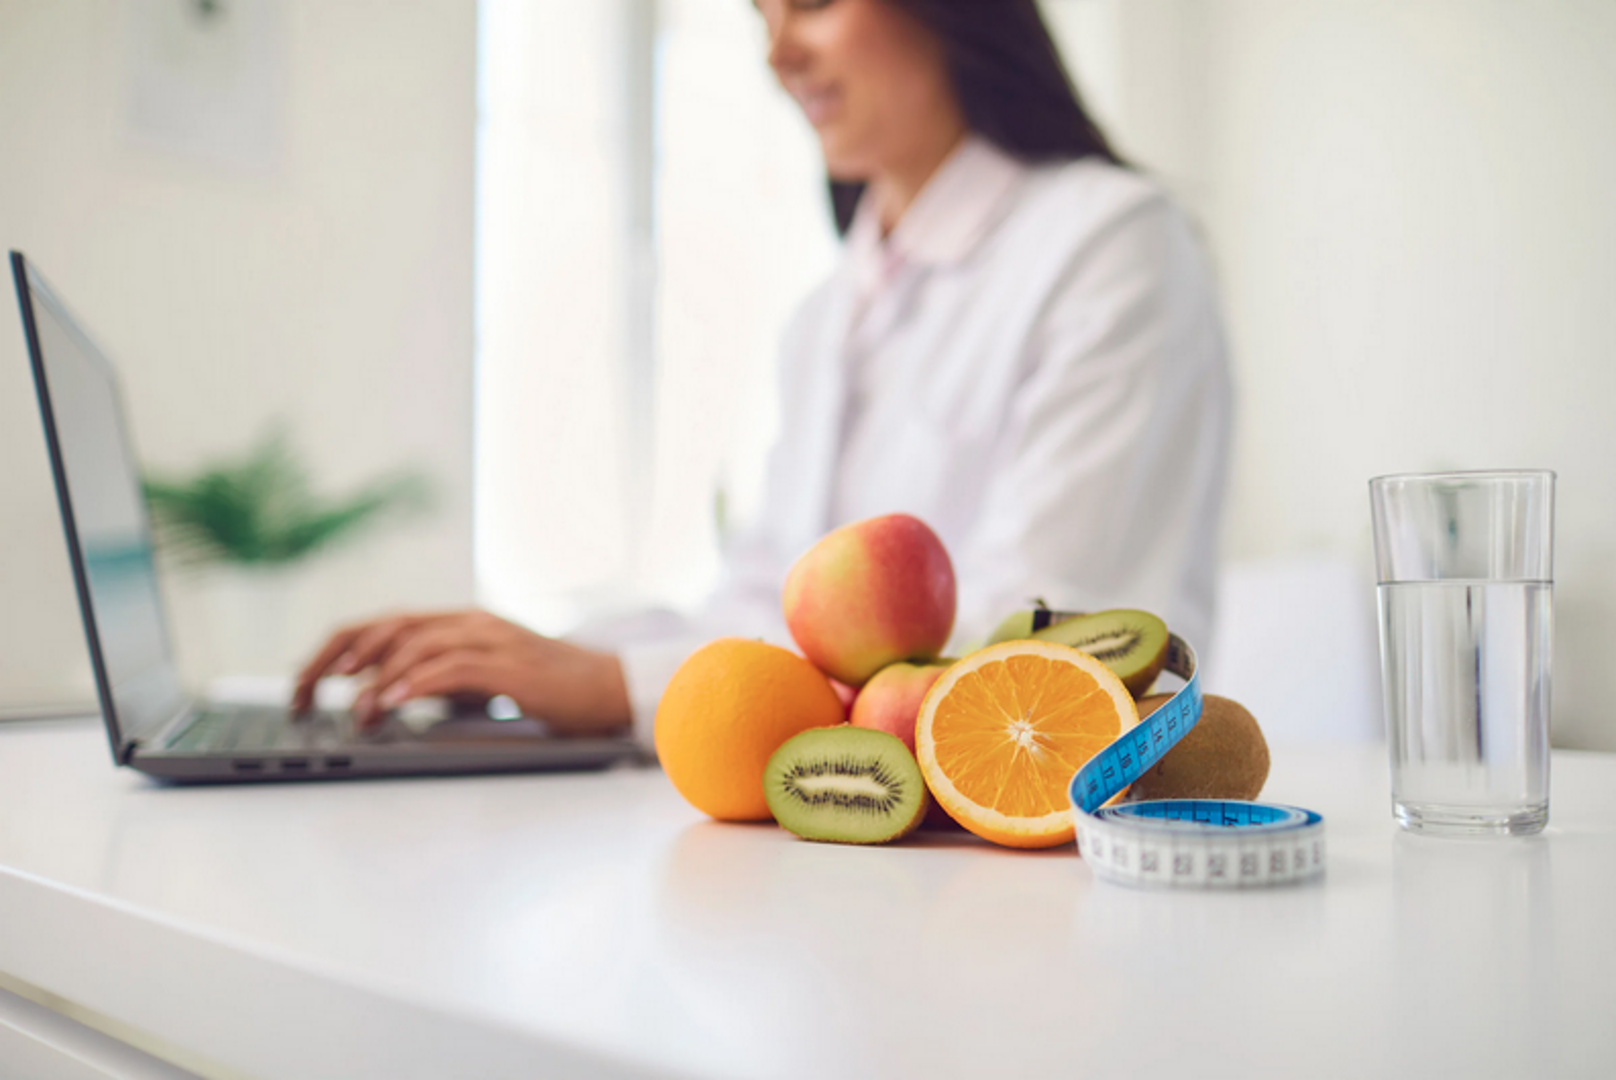 Are you looking  to find a dietitian to help  you with your dietary  needs?